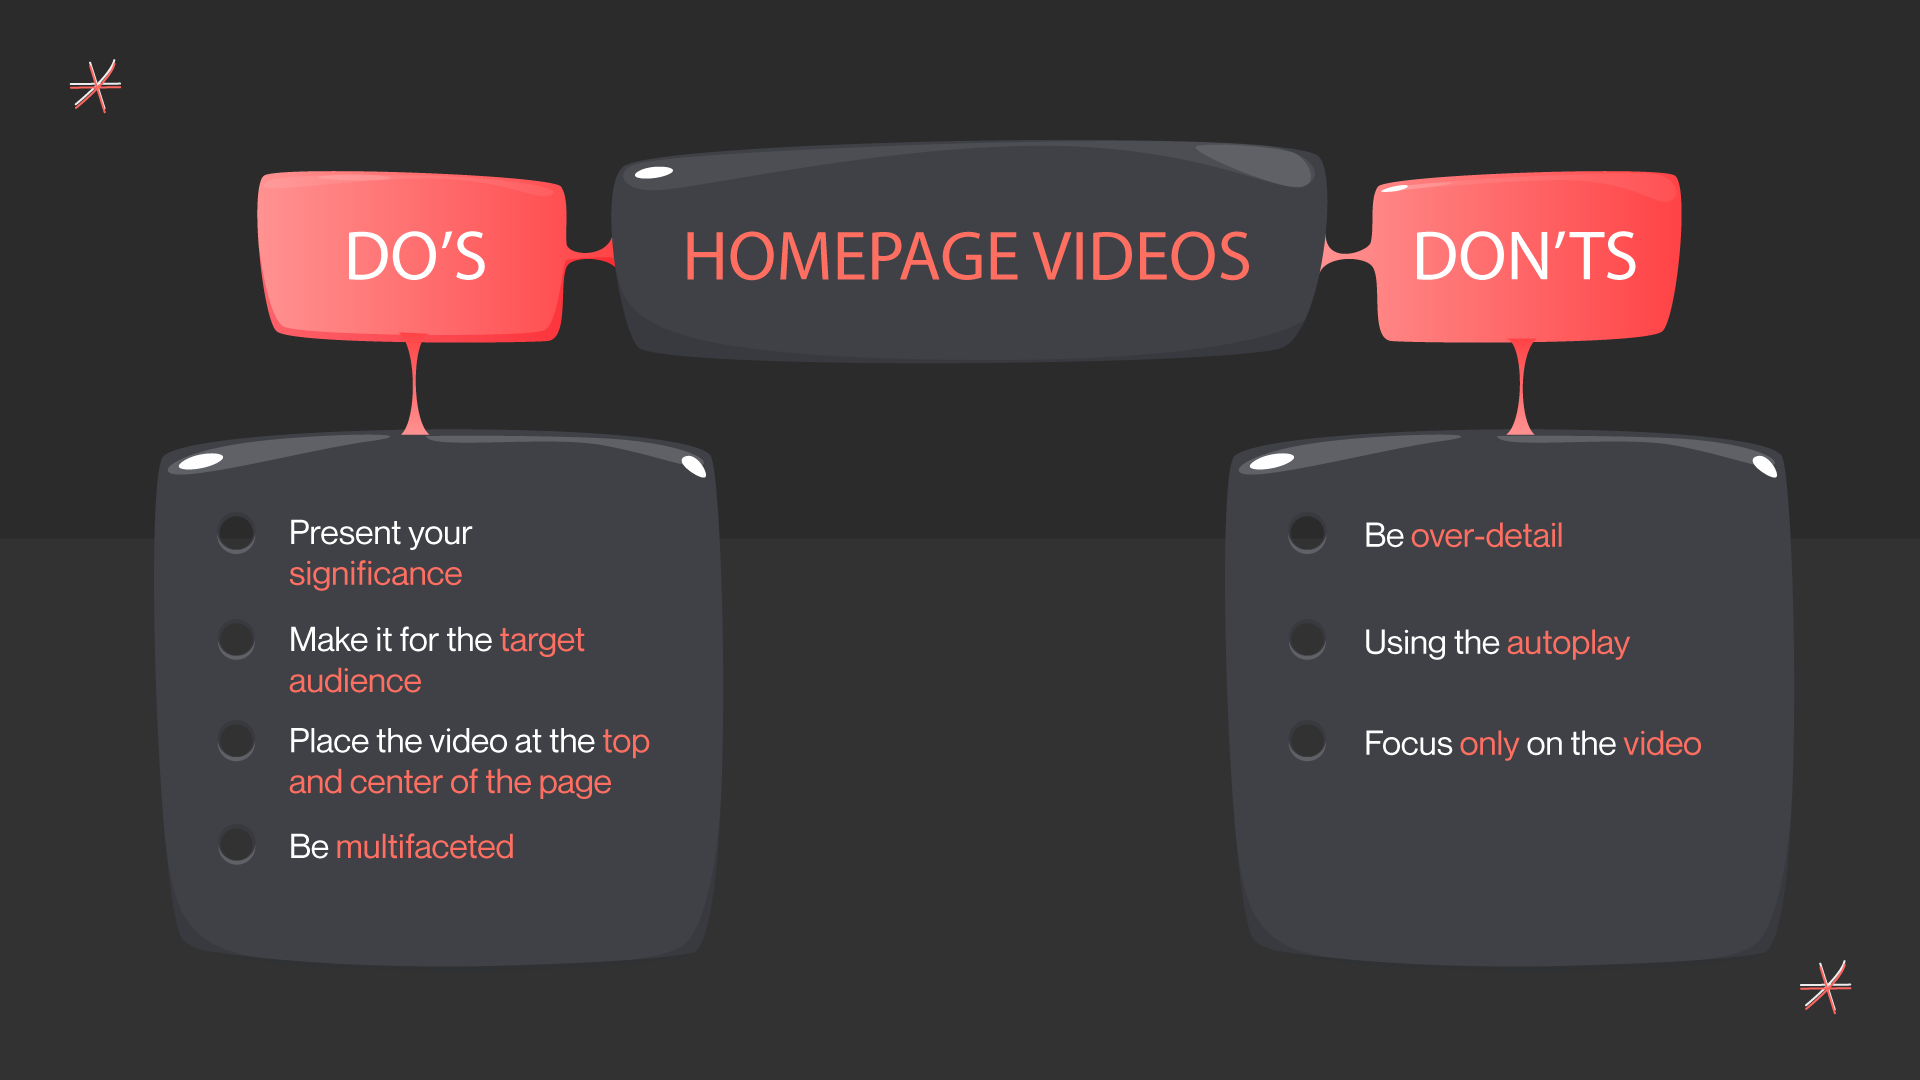 Do’s and dont’s of homepage videos